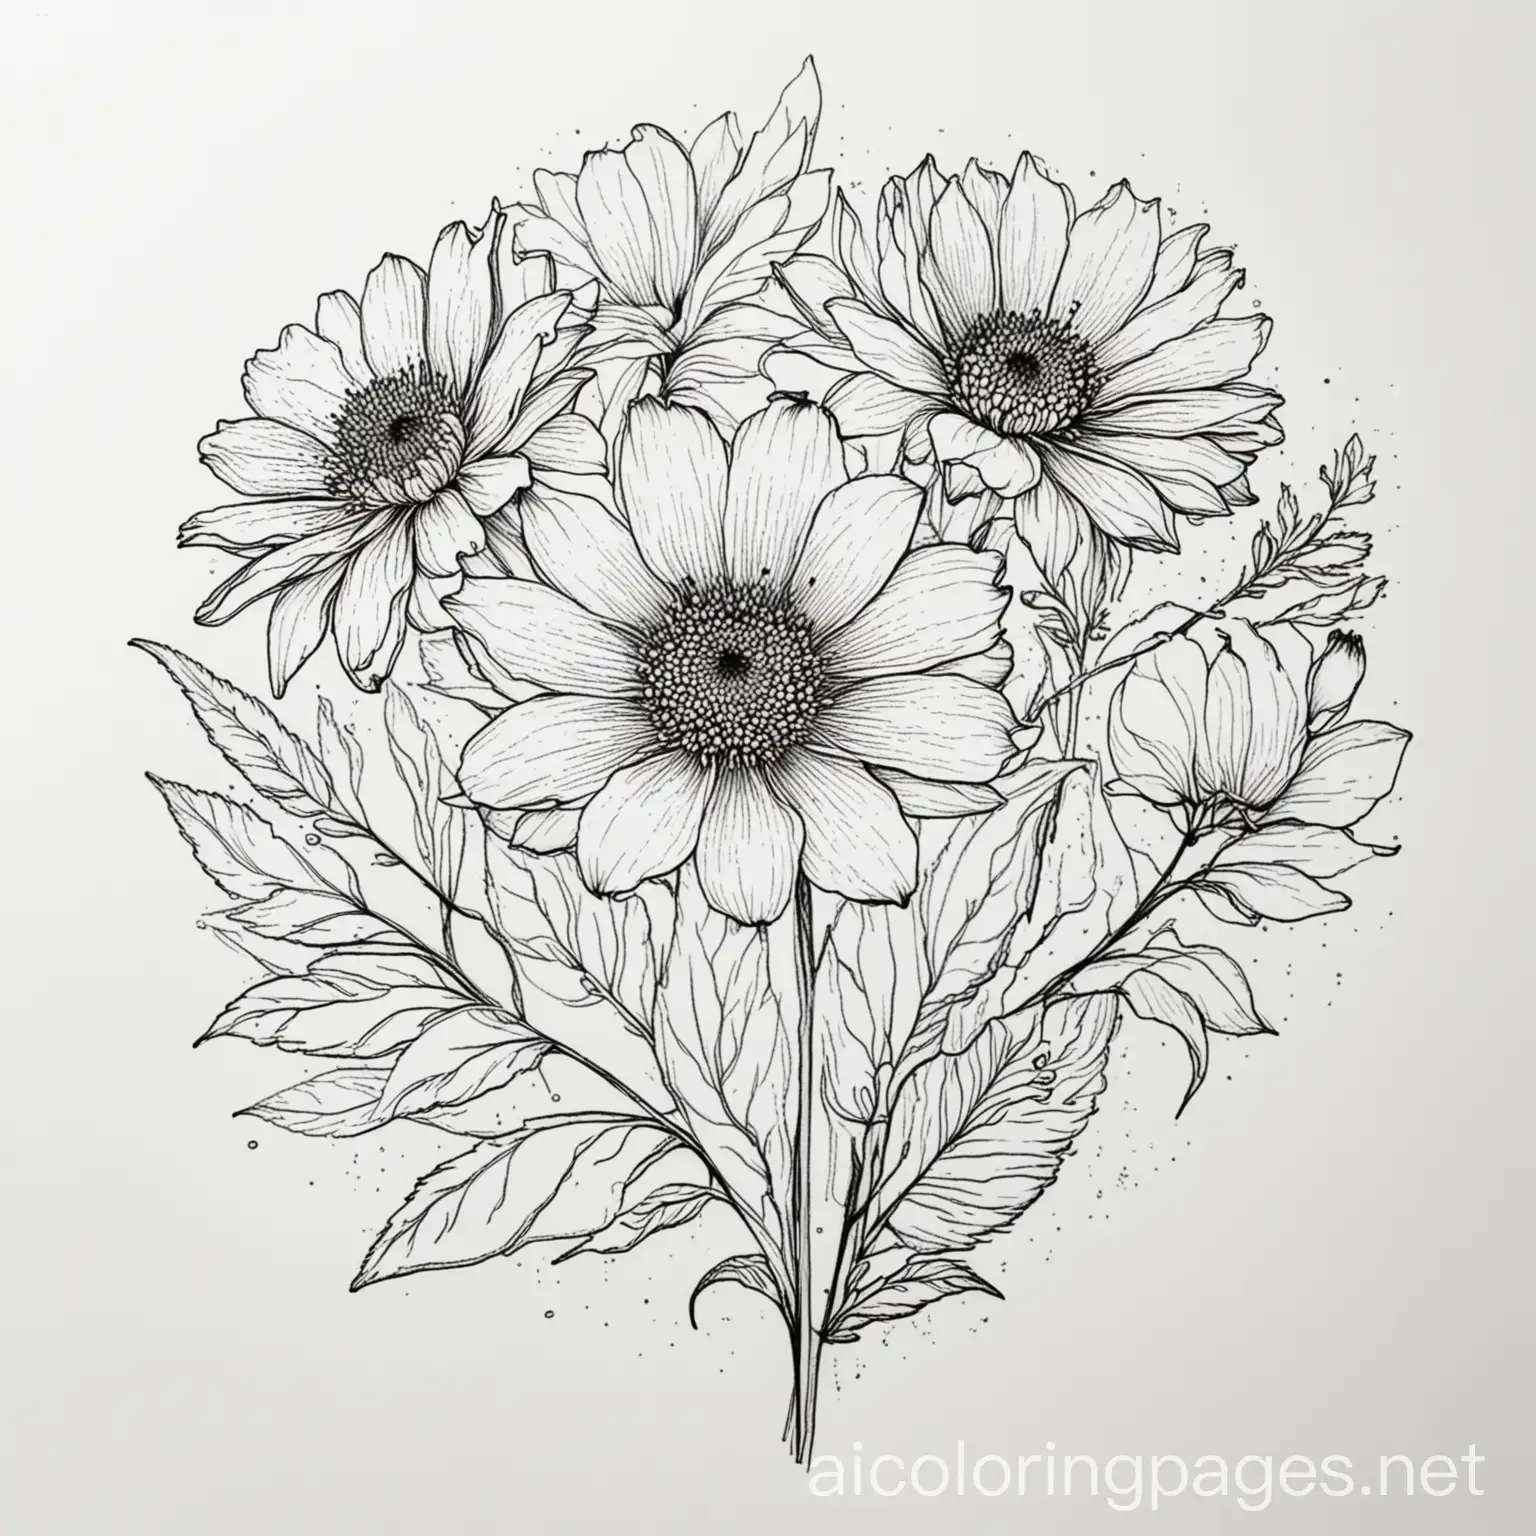 Monochrome-Coloring-Page-of-Flowers-with-Ample-White-Space